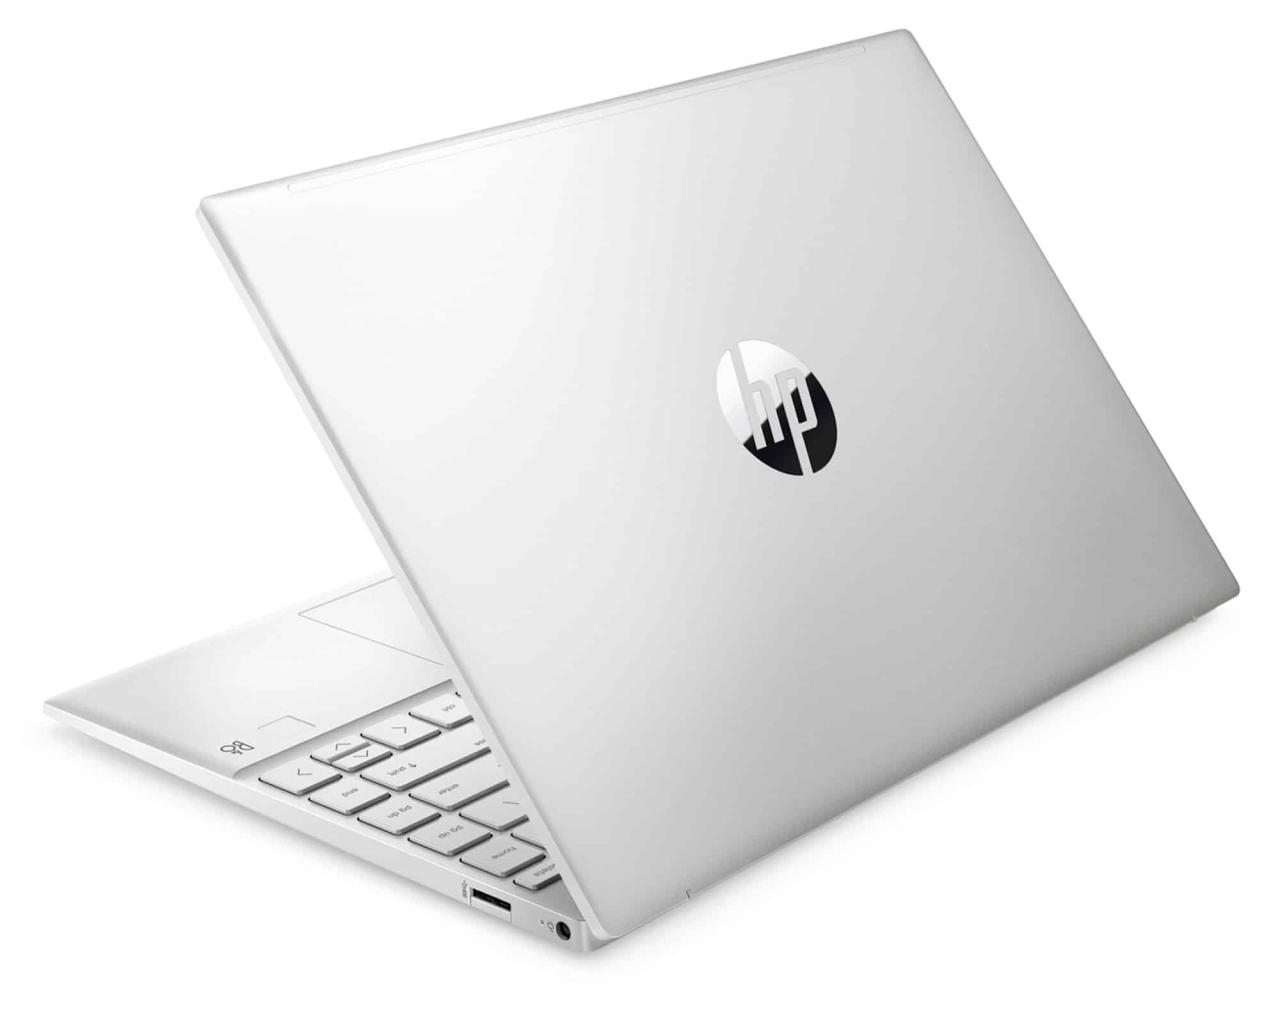 HP Pavilion Aero 13-be1051nf Specs and Details